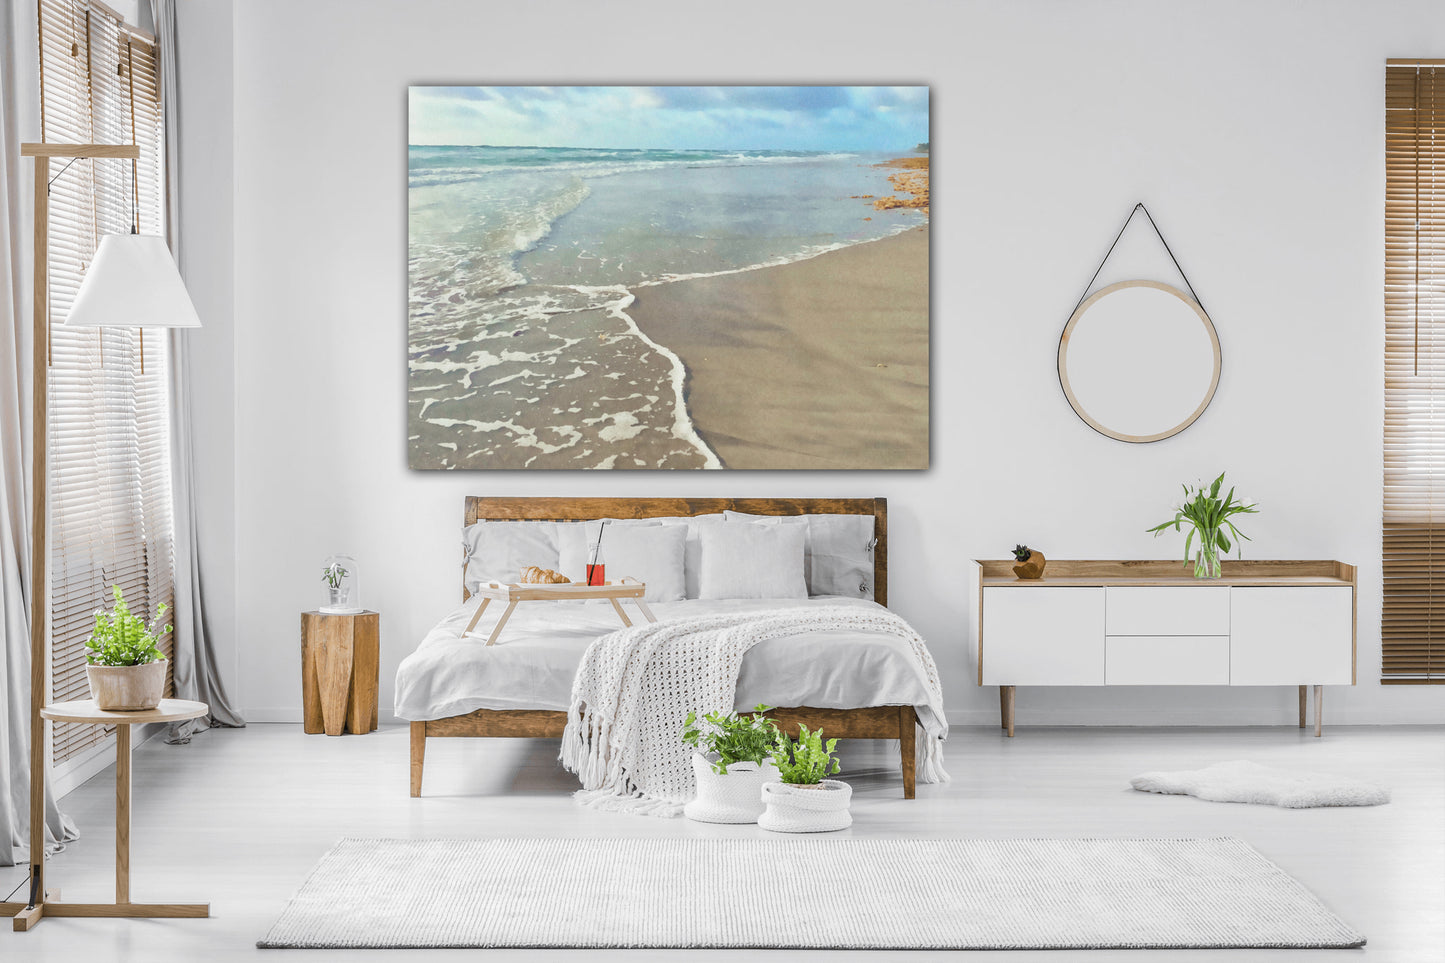 incoming florida tide acrylic print home decor by jacqueline mb designs 